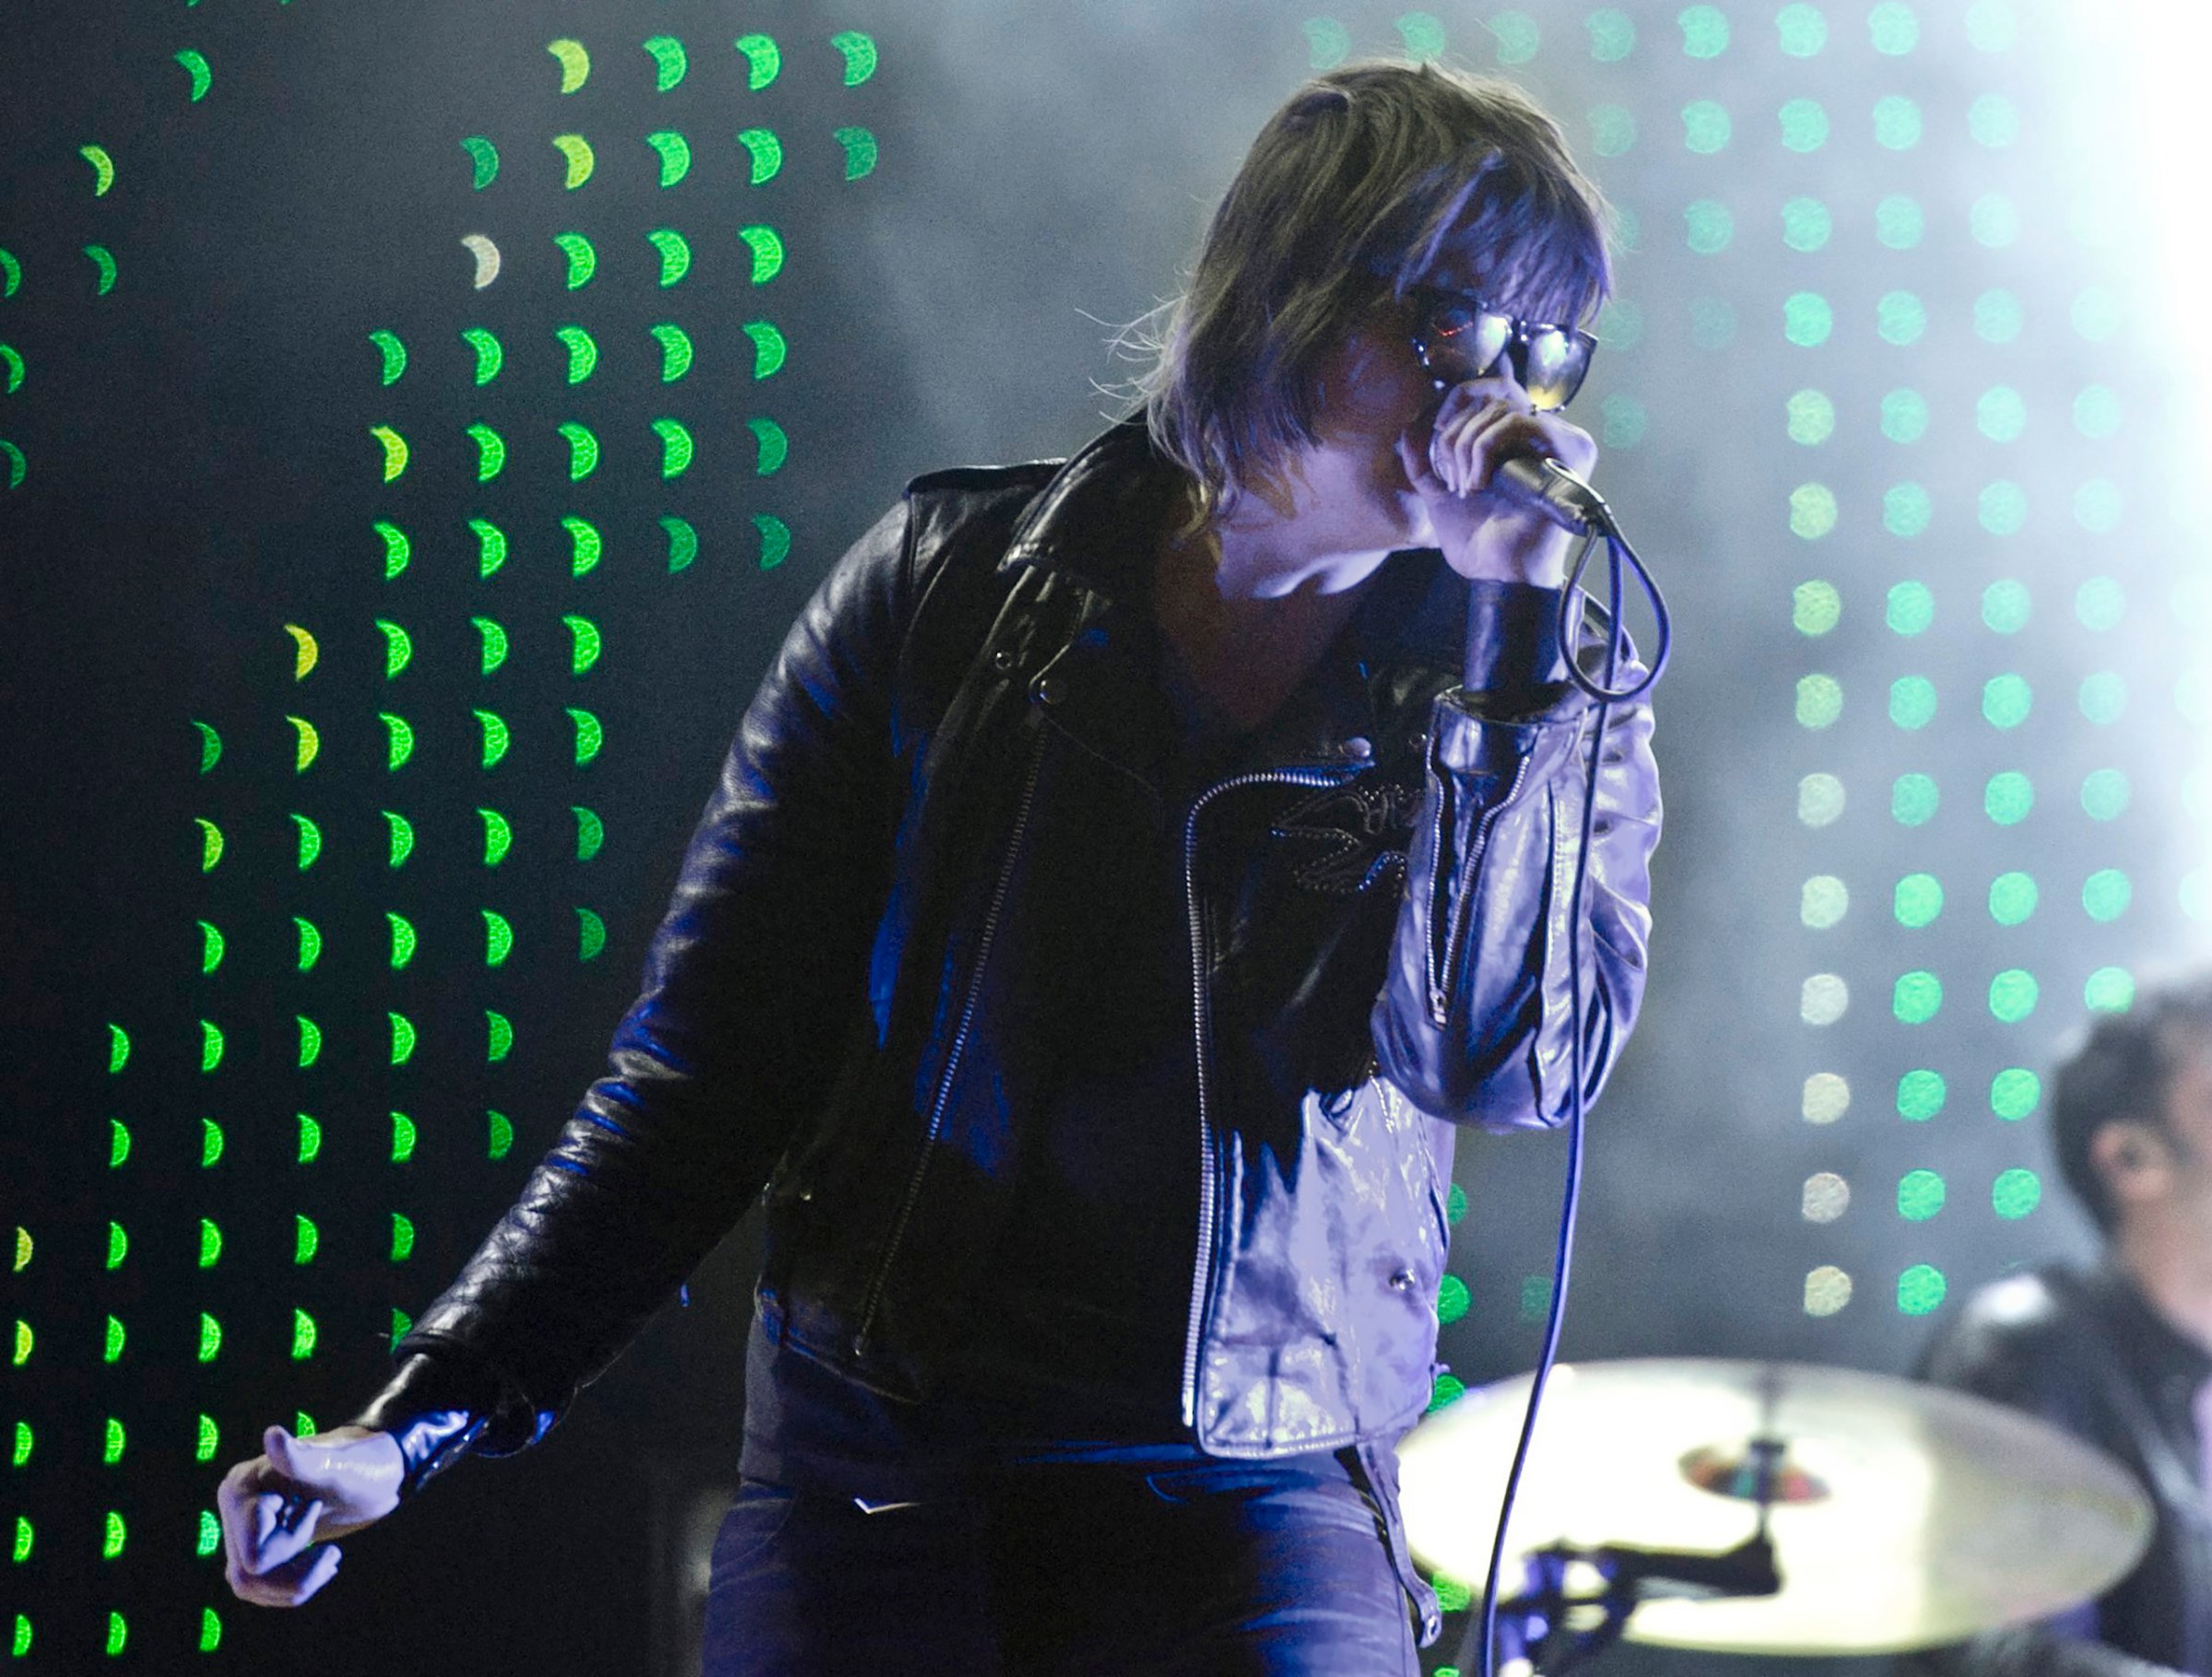 Julian Casablancas of the American rock band Strokes performs at the Peace and Love festival in Borlange, Sweden, early Saturday morning, July 2, 2011.